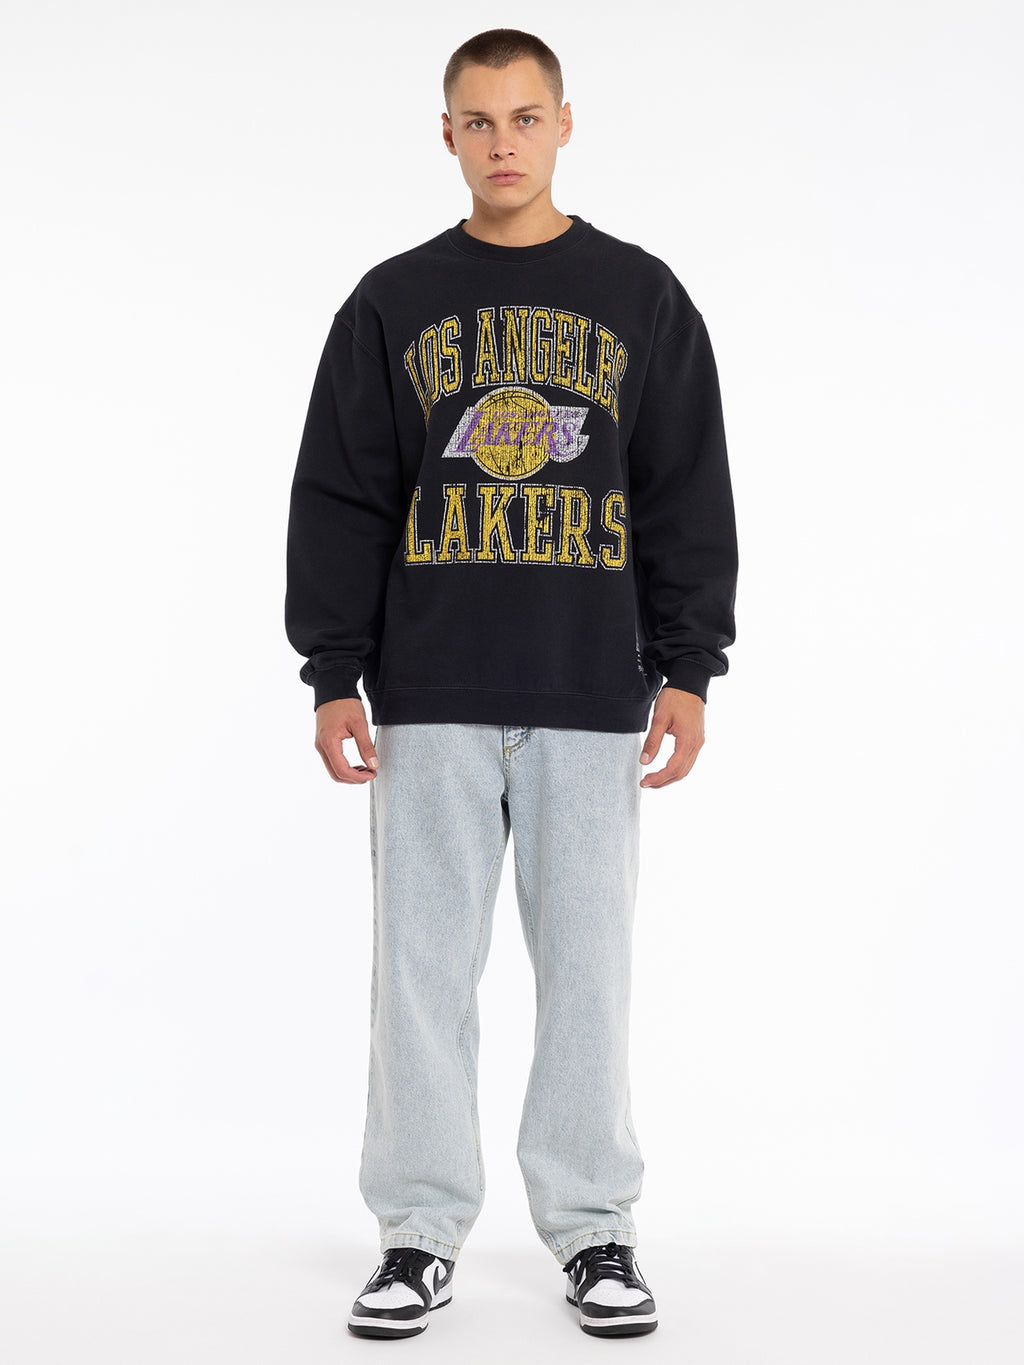 MNA-W25 (Mitchell and ness ivy arch crew lakers faded black) 12395652 MITCHELL AND NESS